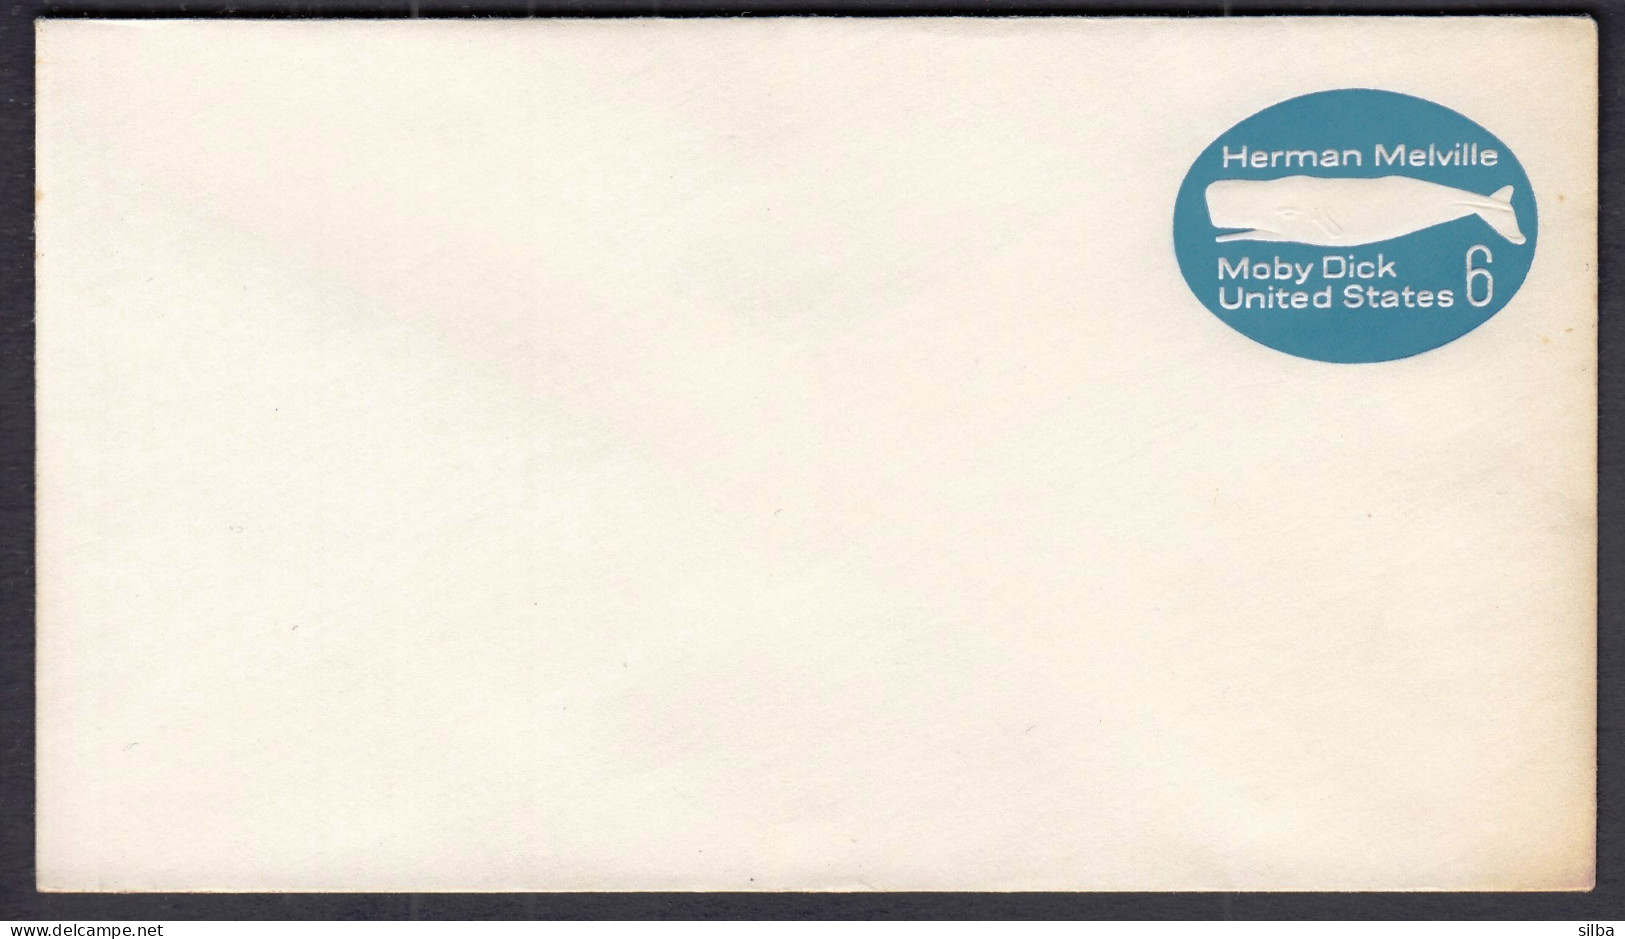 United States 1970 / Herman Melville / Moby Dick, Whale / Postal Stationery 6 C - 1961-80